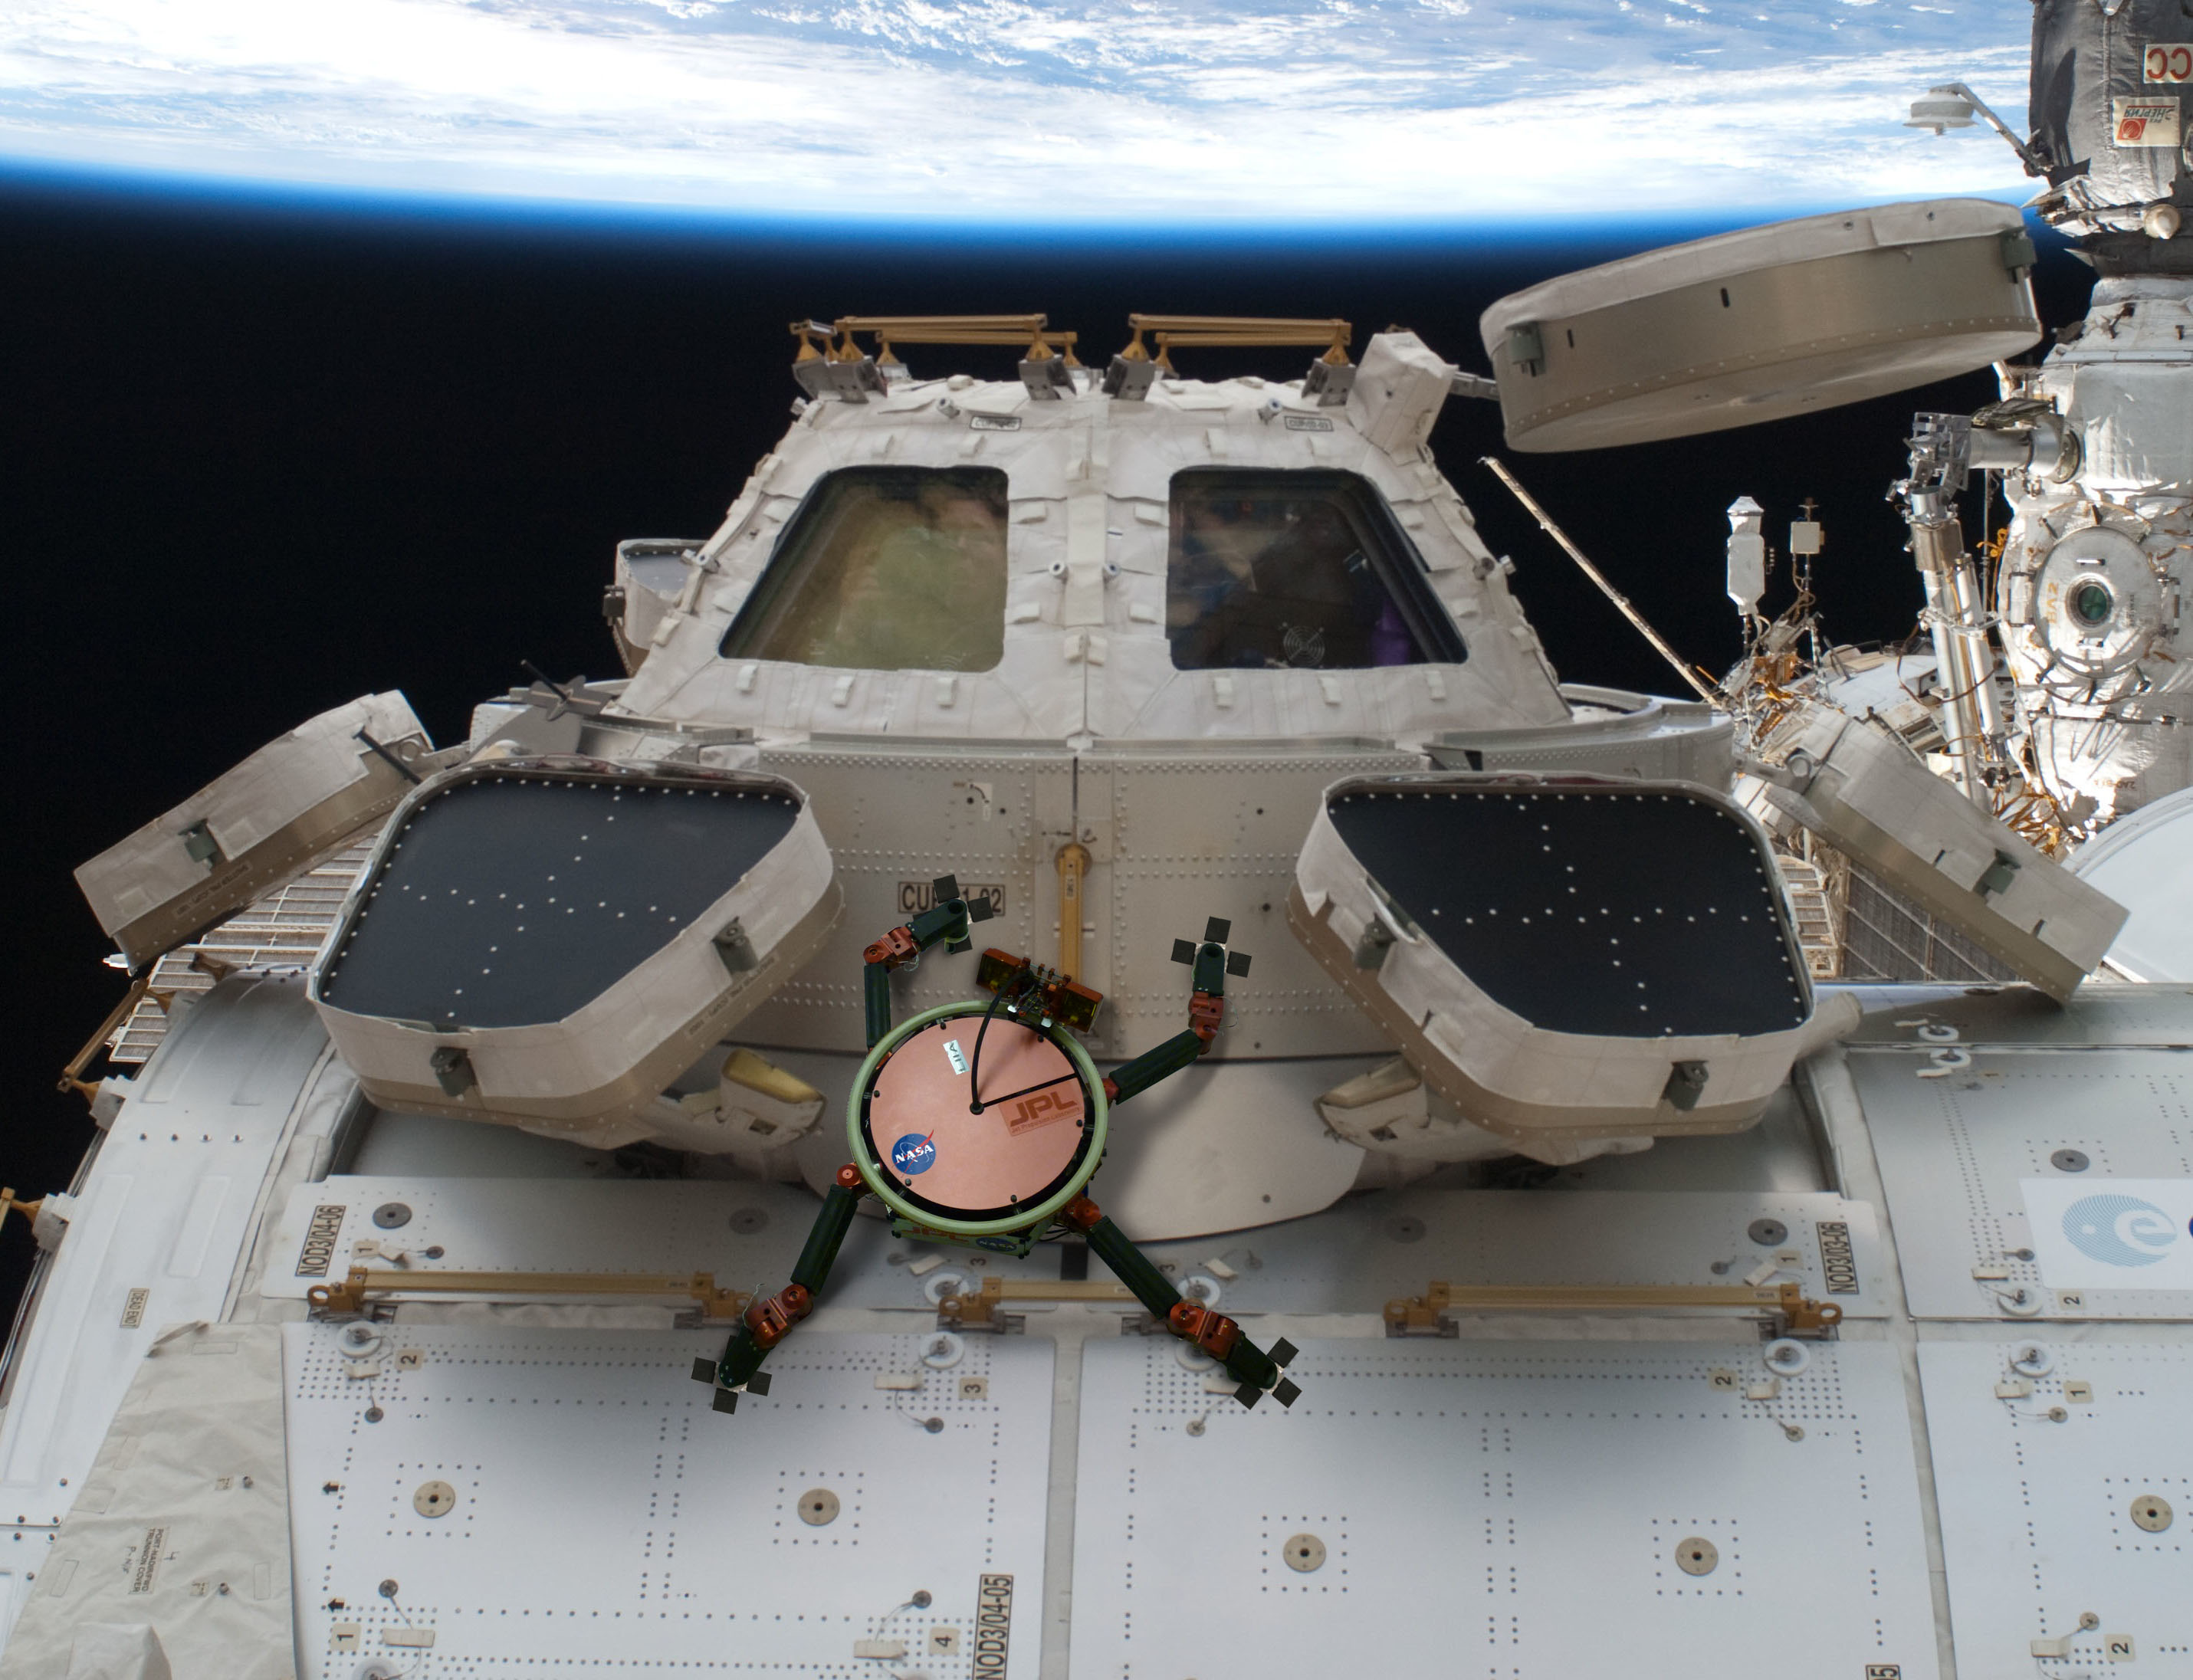 a Limbed Excursion Mechanical Utility Robot (LEMUR) climbs around the outside of the space station. The Jet Propulsion Laboratory (JPL) considered outfitting LEMUR with its gecko-imitating gripper technology